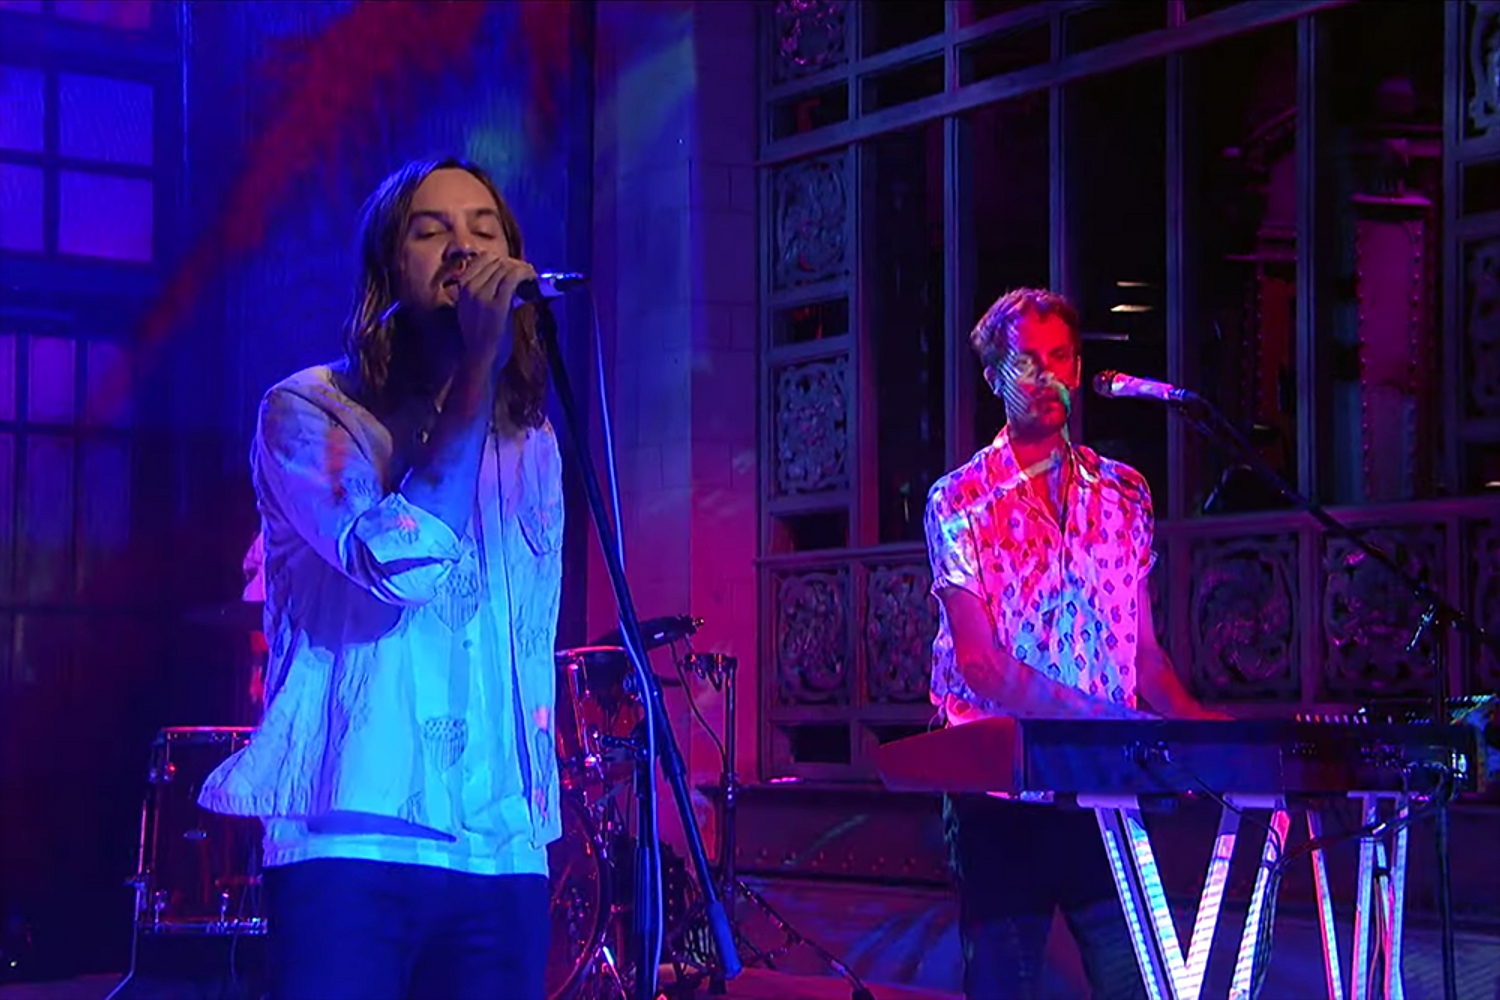 Tame Impala debut new song 'Borderline' on SNL